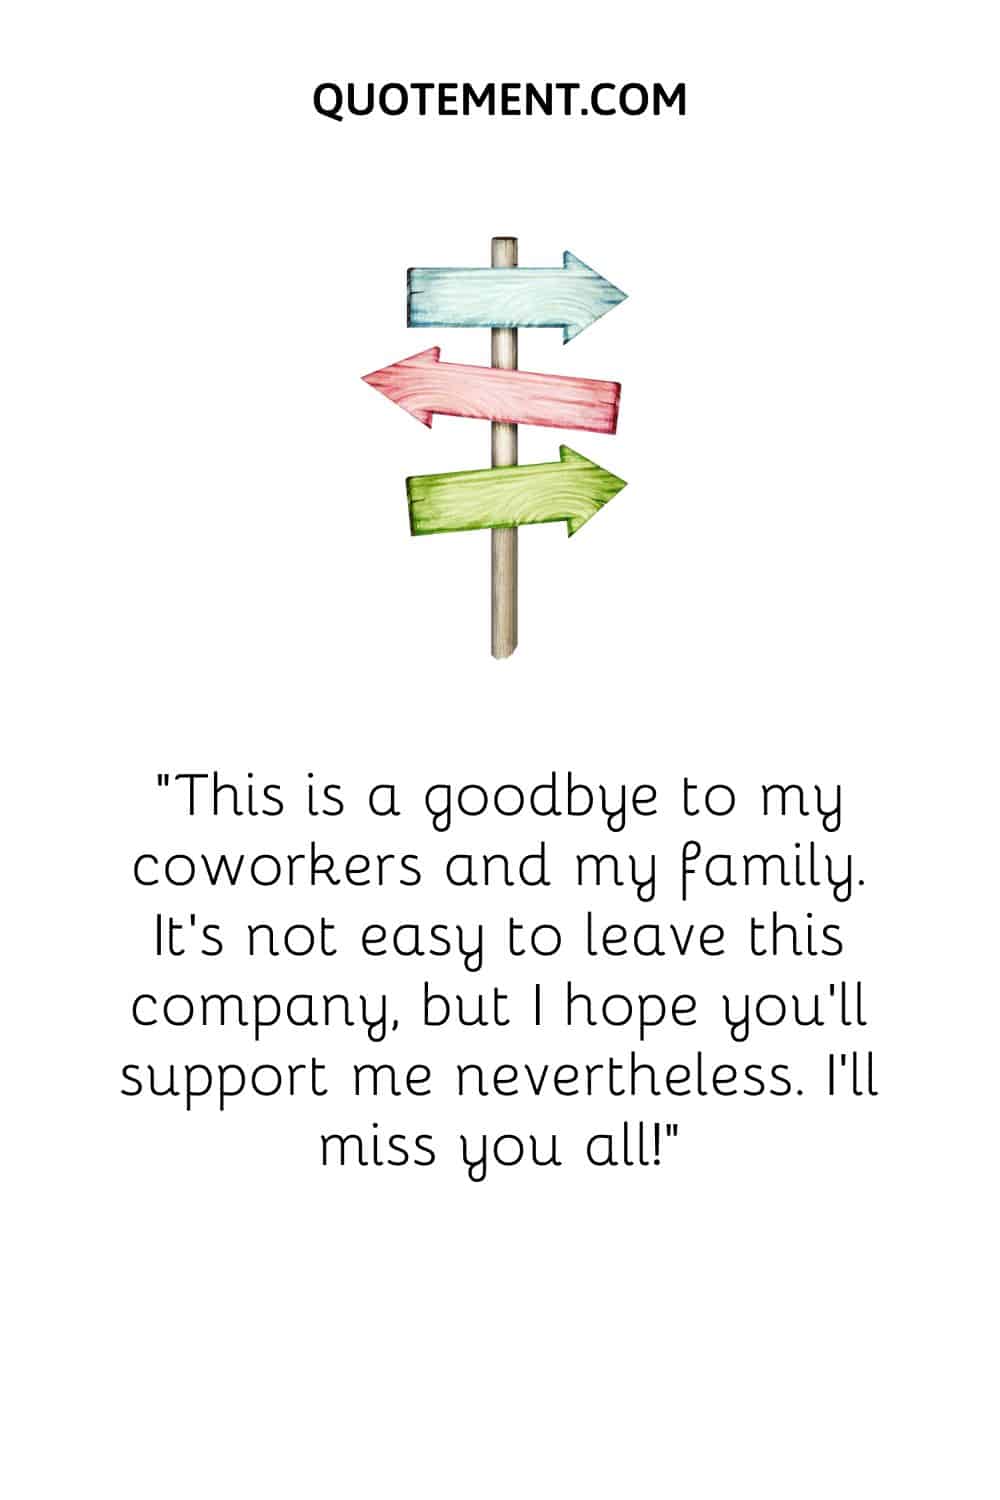 This is a goodbye to my coworkers and my family. It’s not easy to leave this company, but I hope you’ll support me nevertheless. I’ll miss you all!